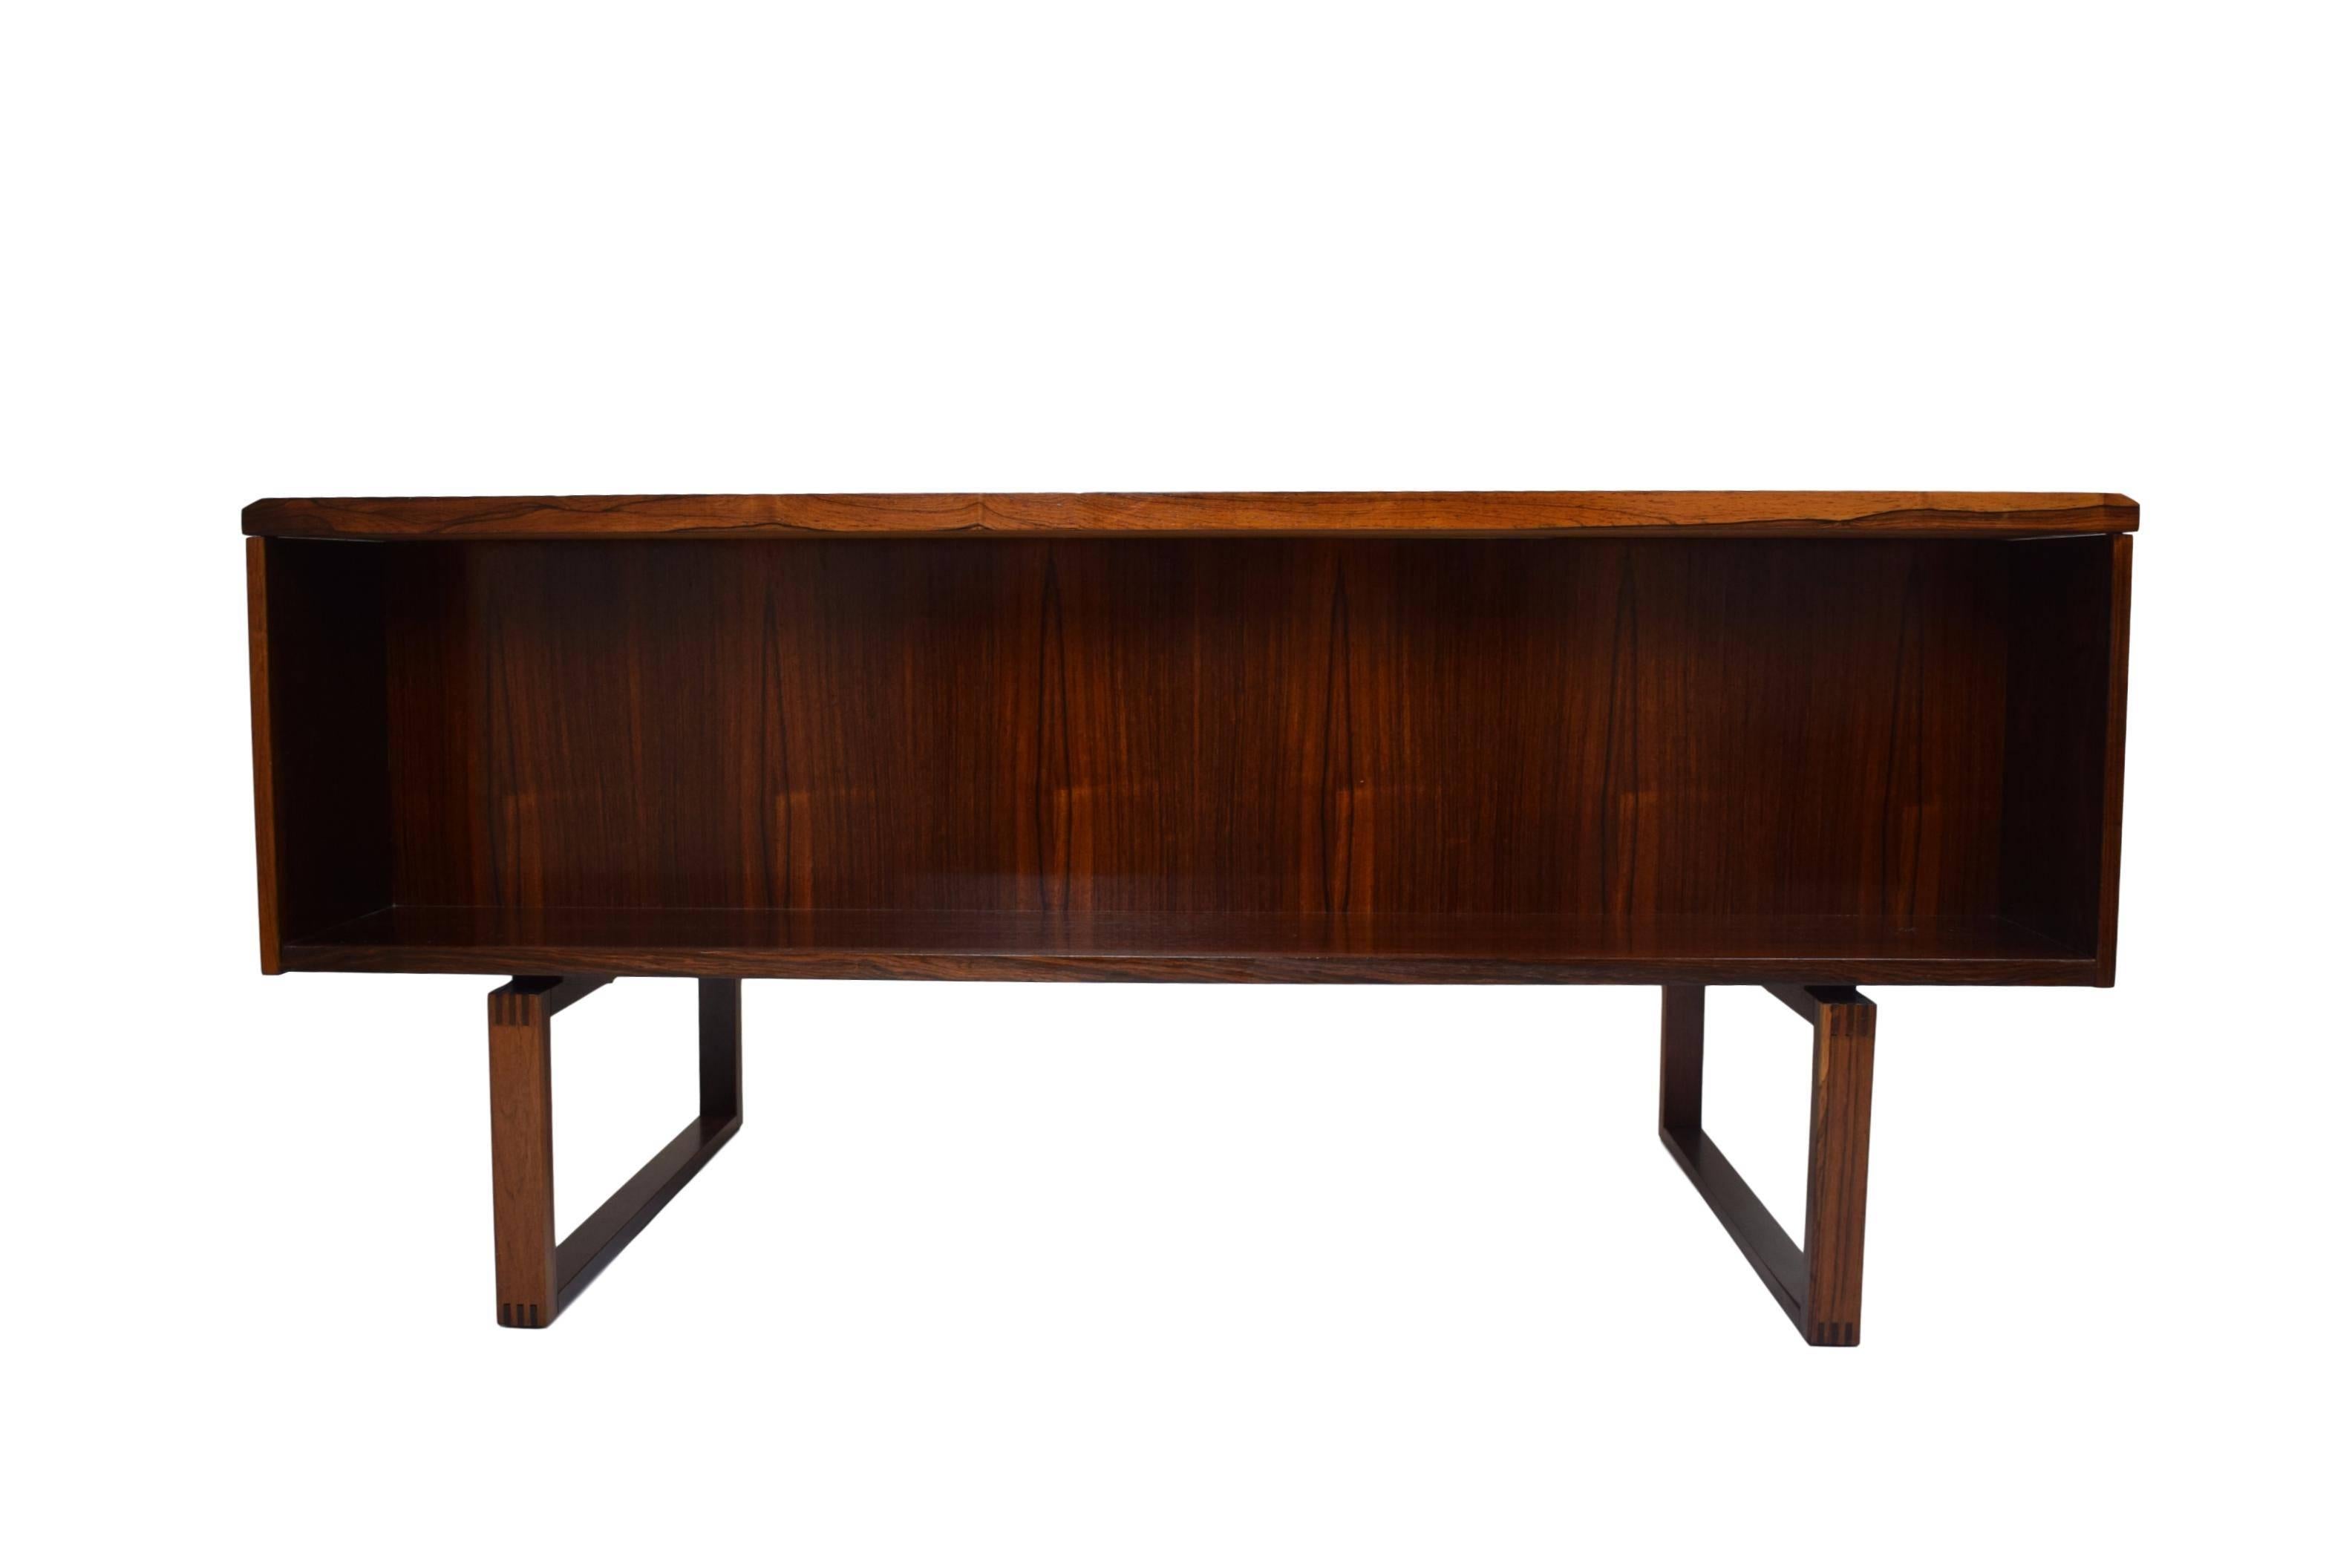 A Danish midcentury rosewood desk by Henning Jensen (1924) and Torben Valeur (1920-2000). Six drawers on the front and one large storage compartment on the rear. Rosewood veneer and solid rosewood legs/ drawer handles. Legs and handles with finger